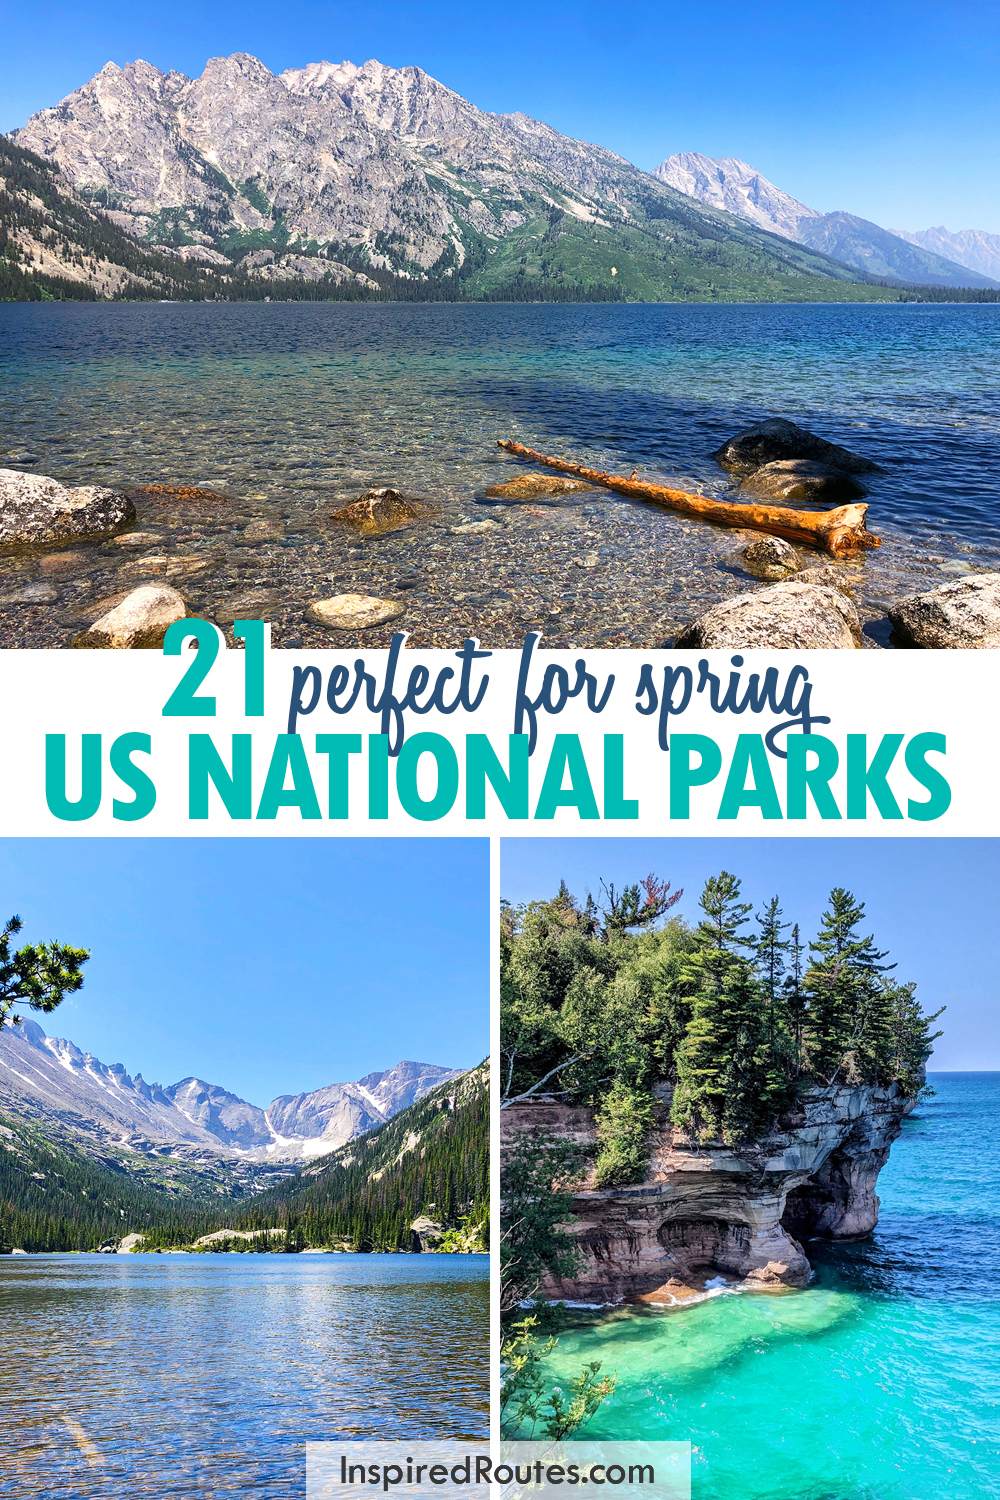 21 perfect for spring US national parks with mountain and lake images